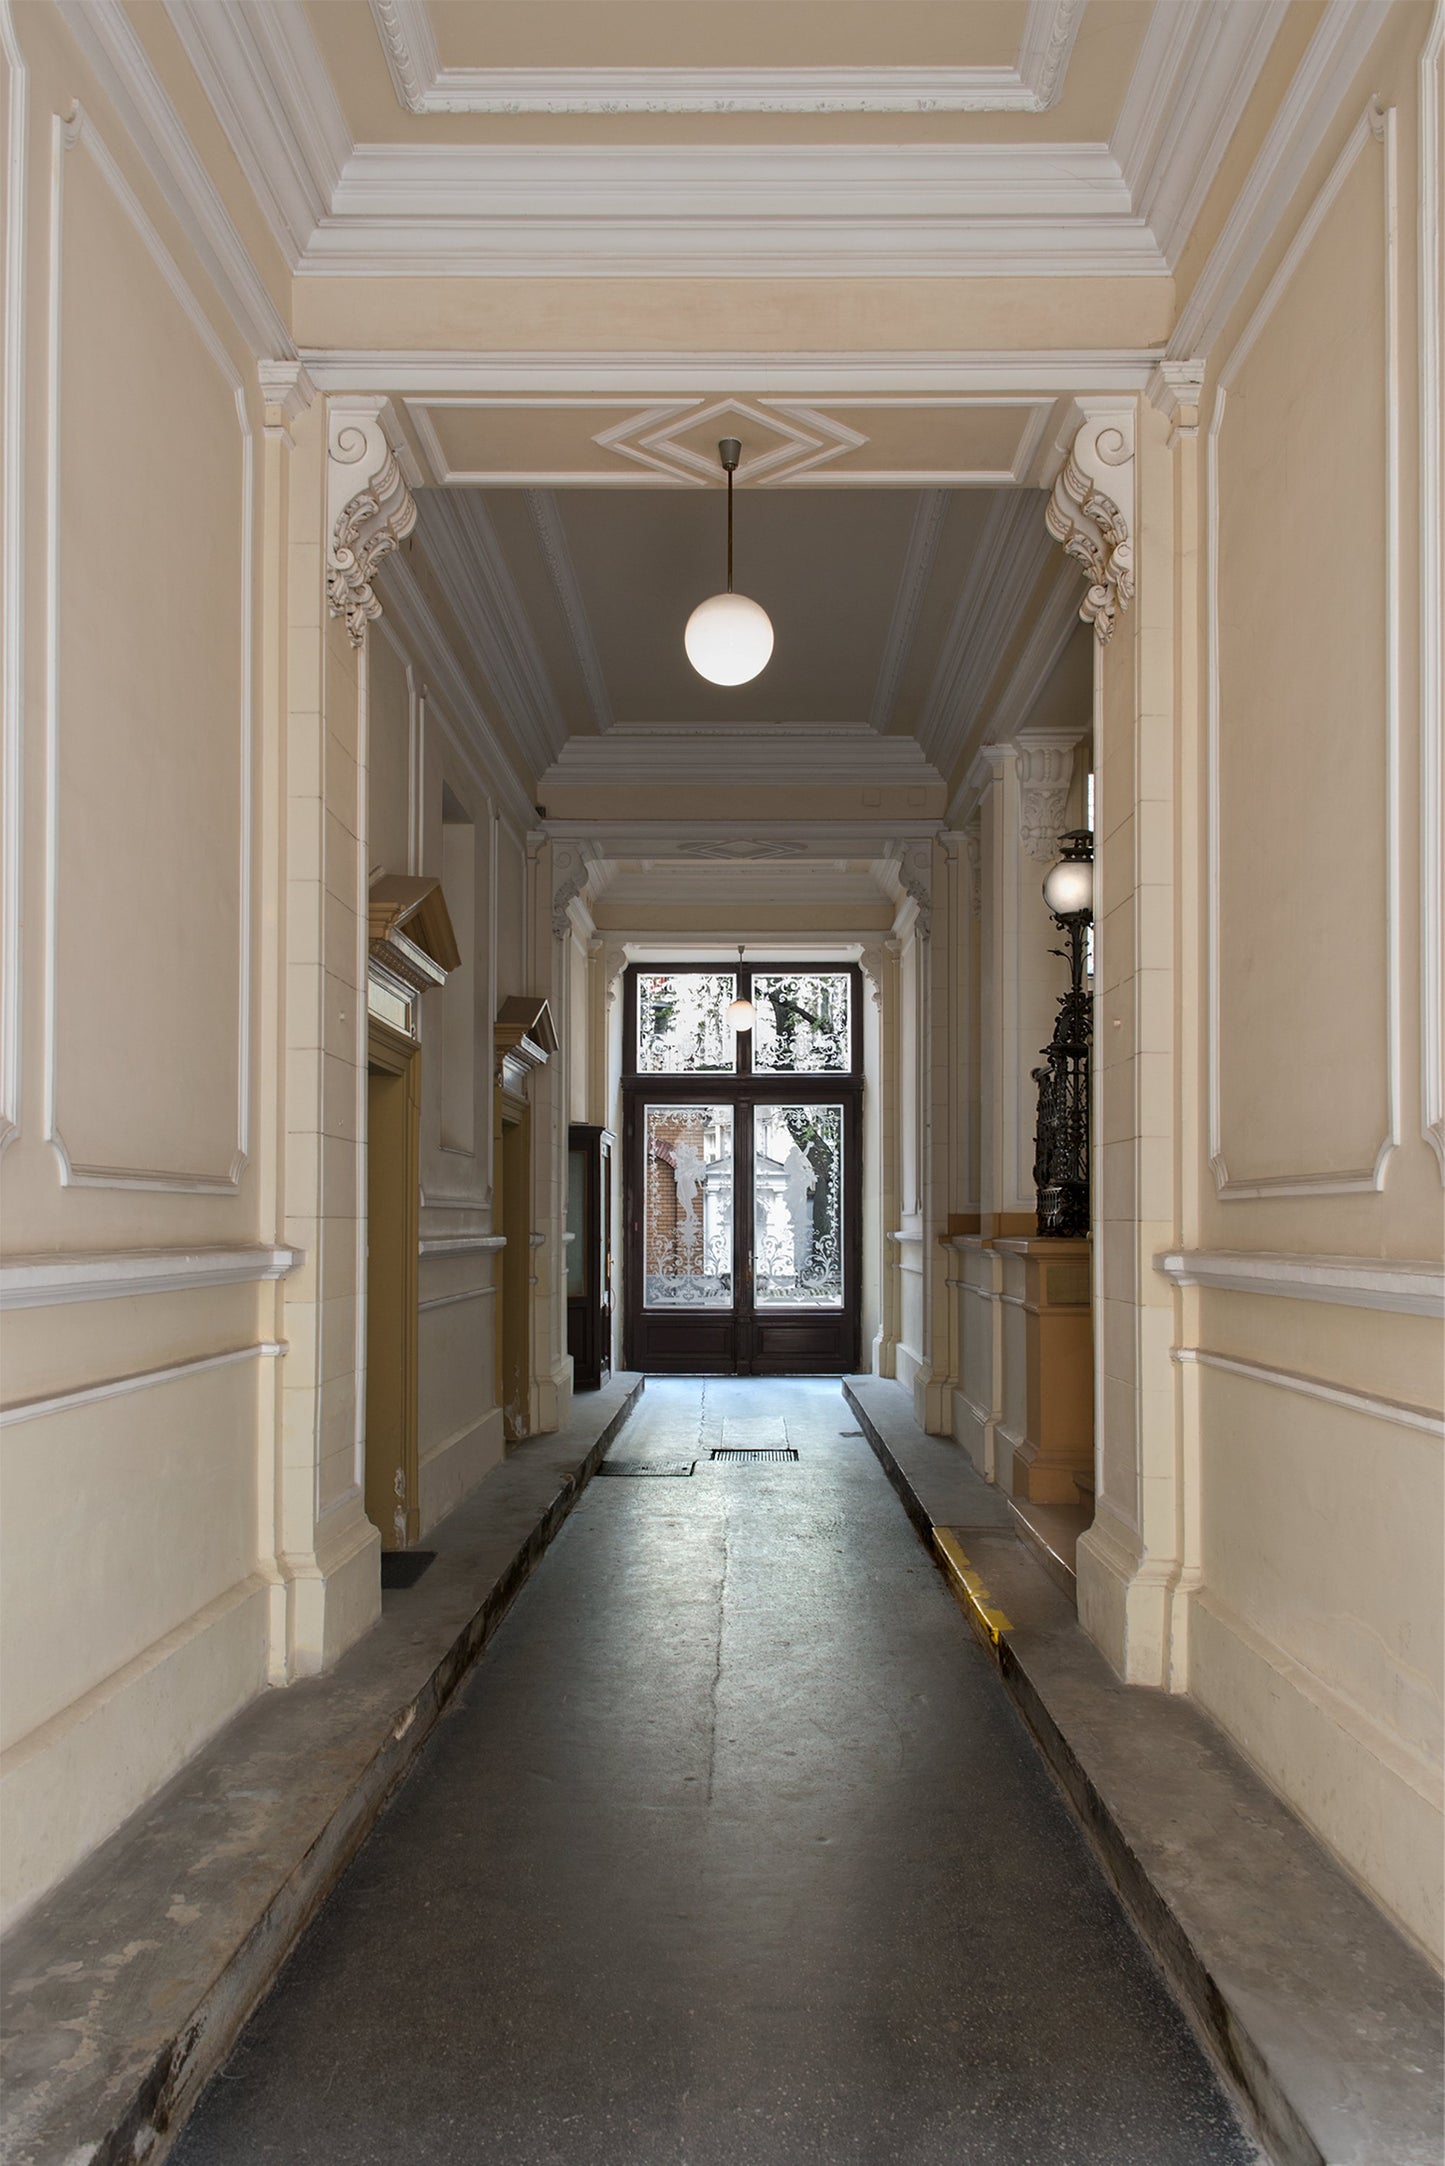 Load image into Gallery viewer, Entrance Passage, Berggasse 19, Vienna
